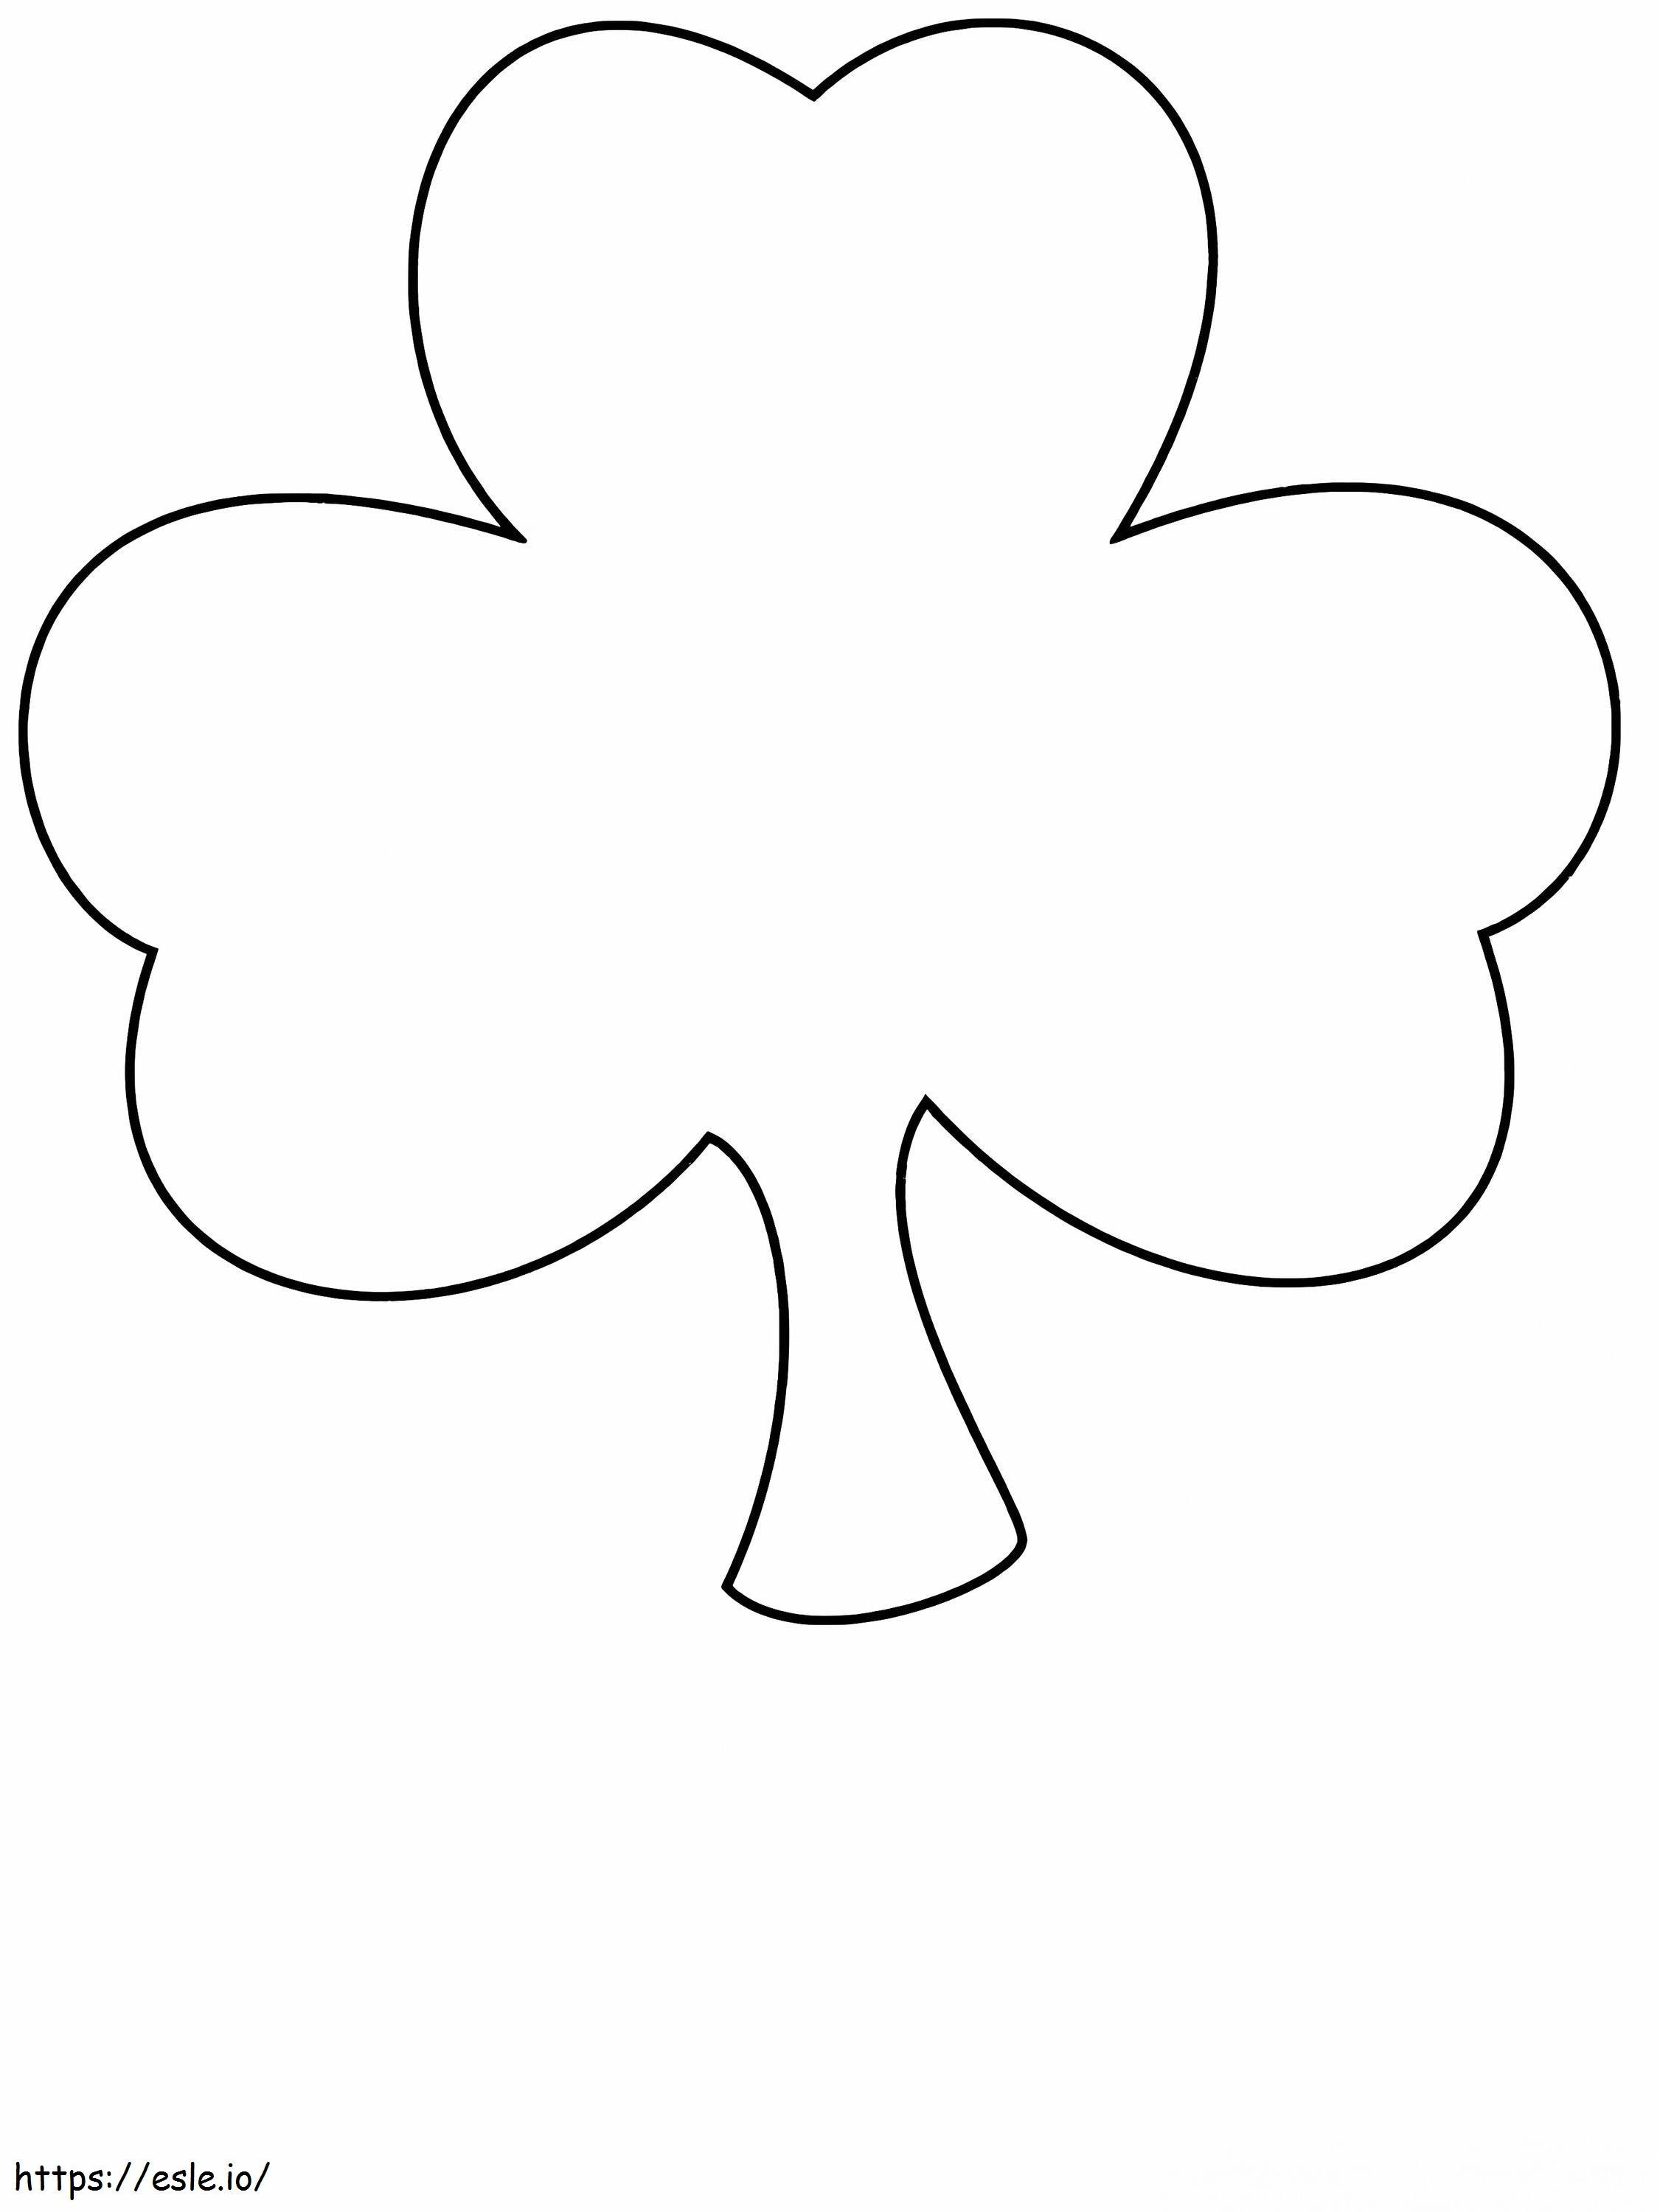 Easy Clover coloring page